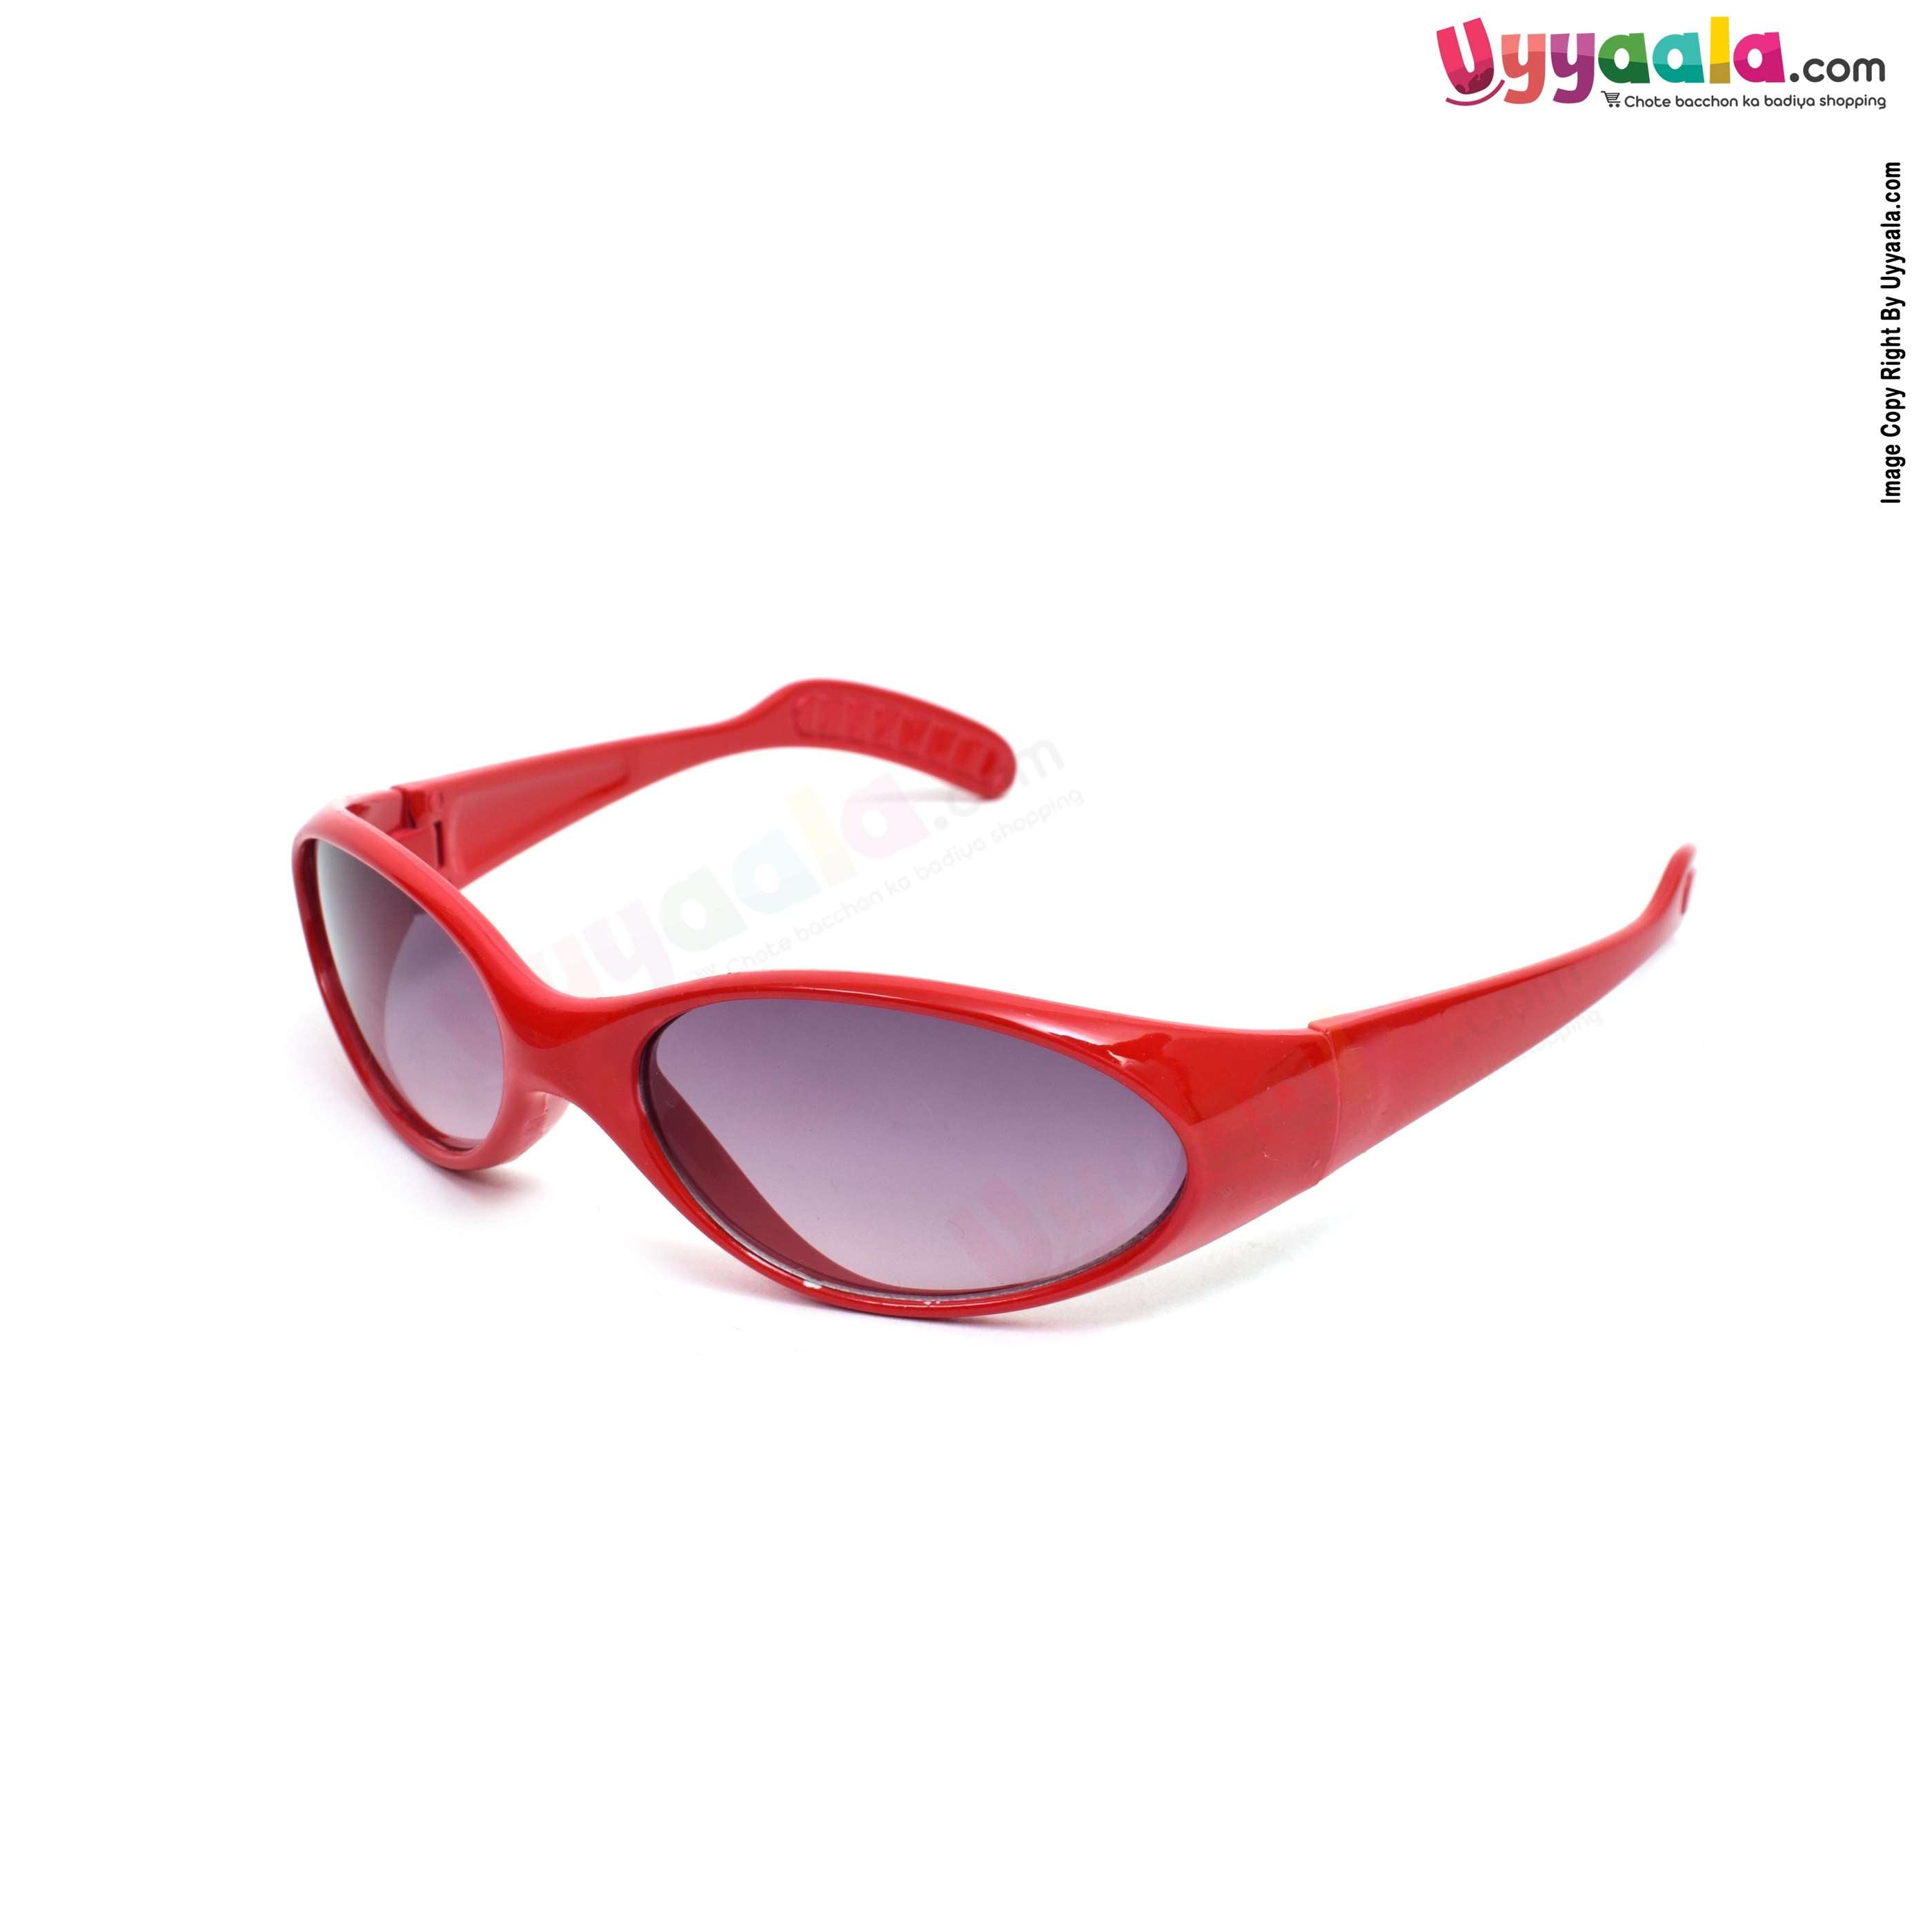 Stylish cat-eye tinted sports sunglasses for kids - red